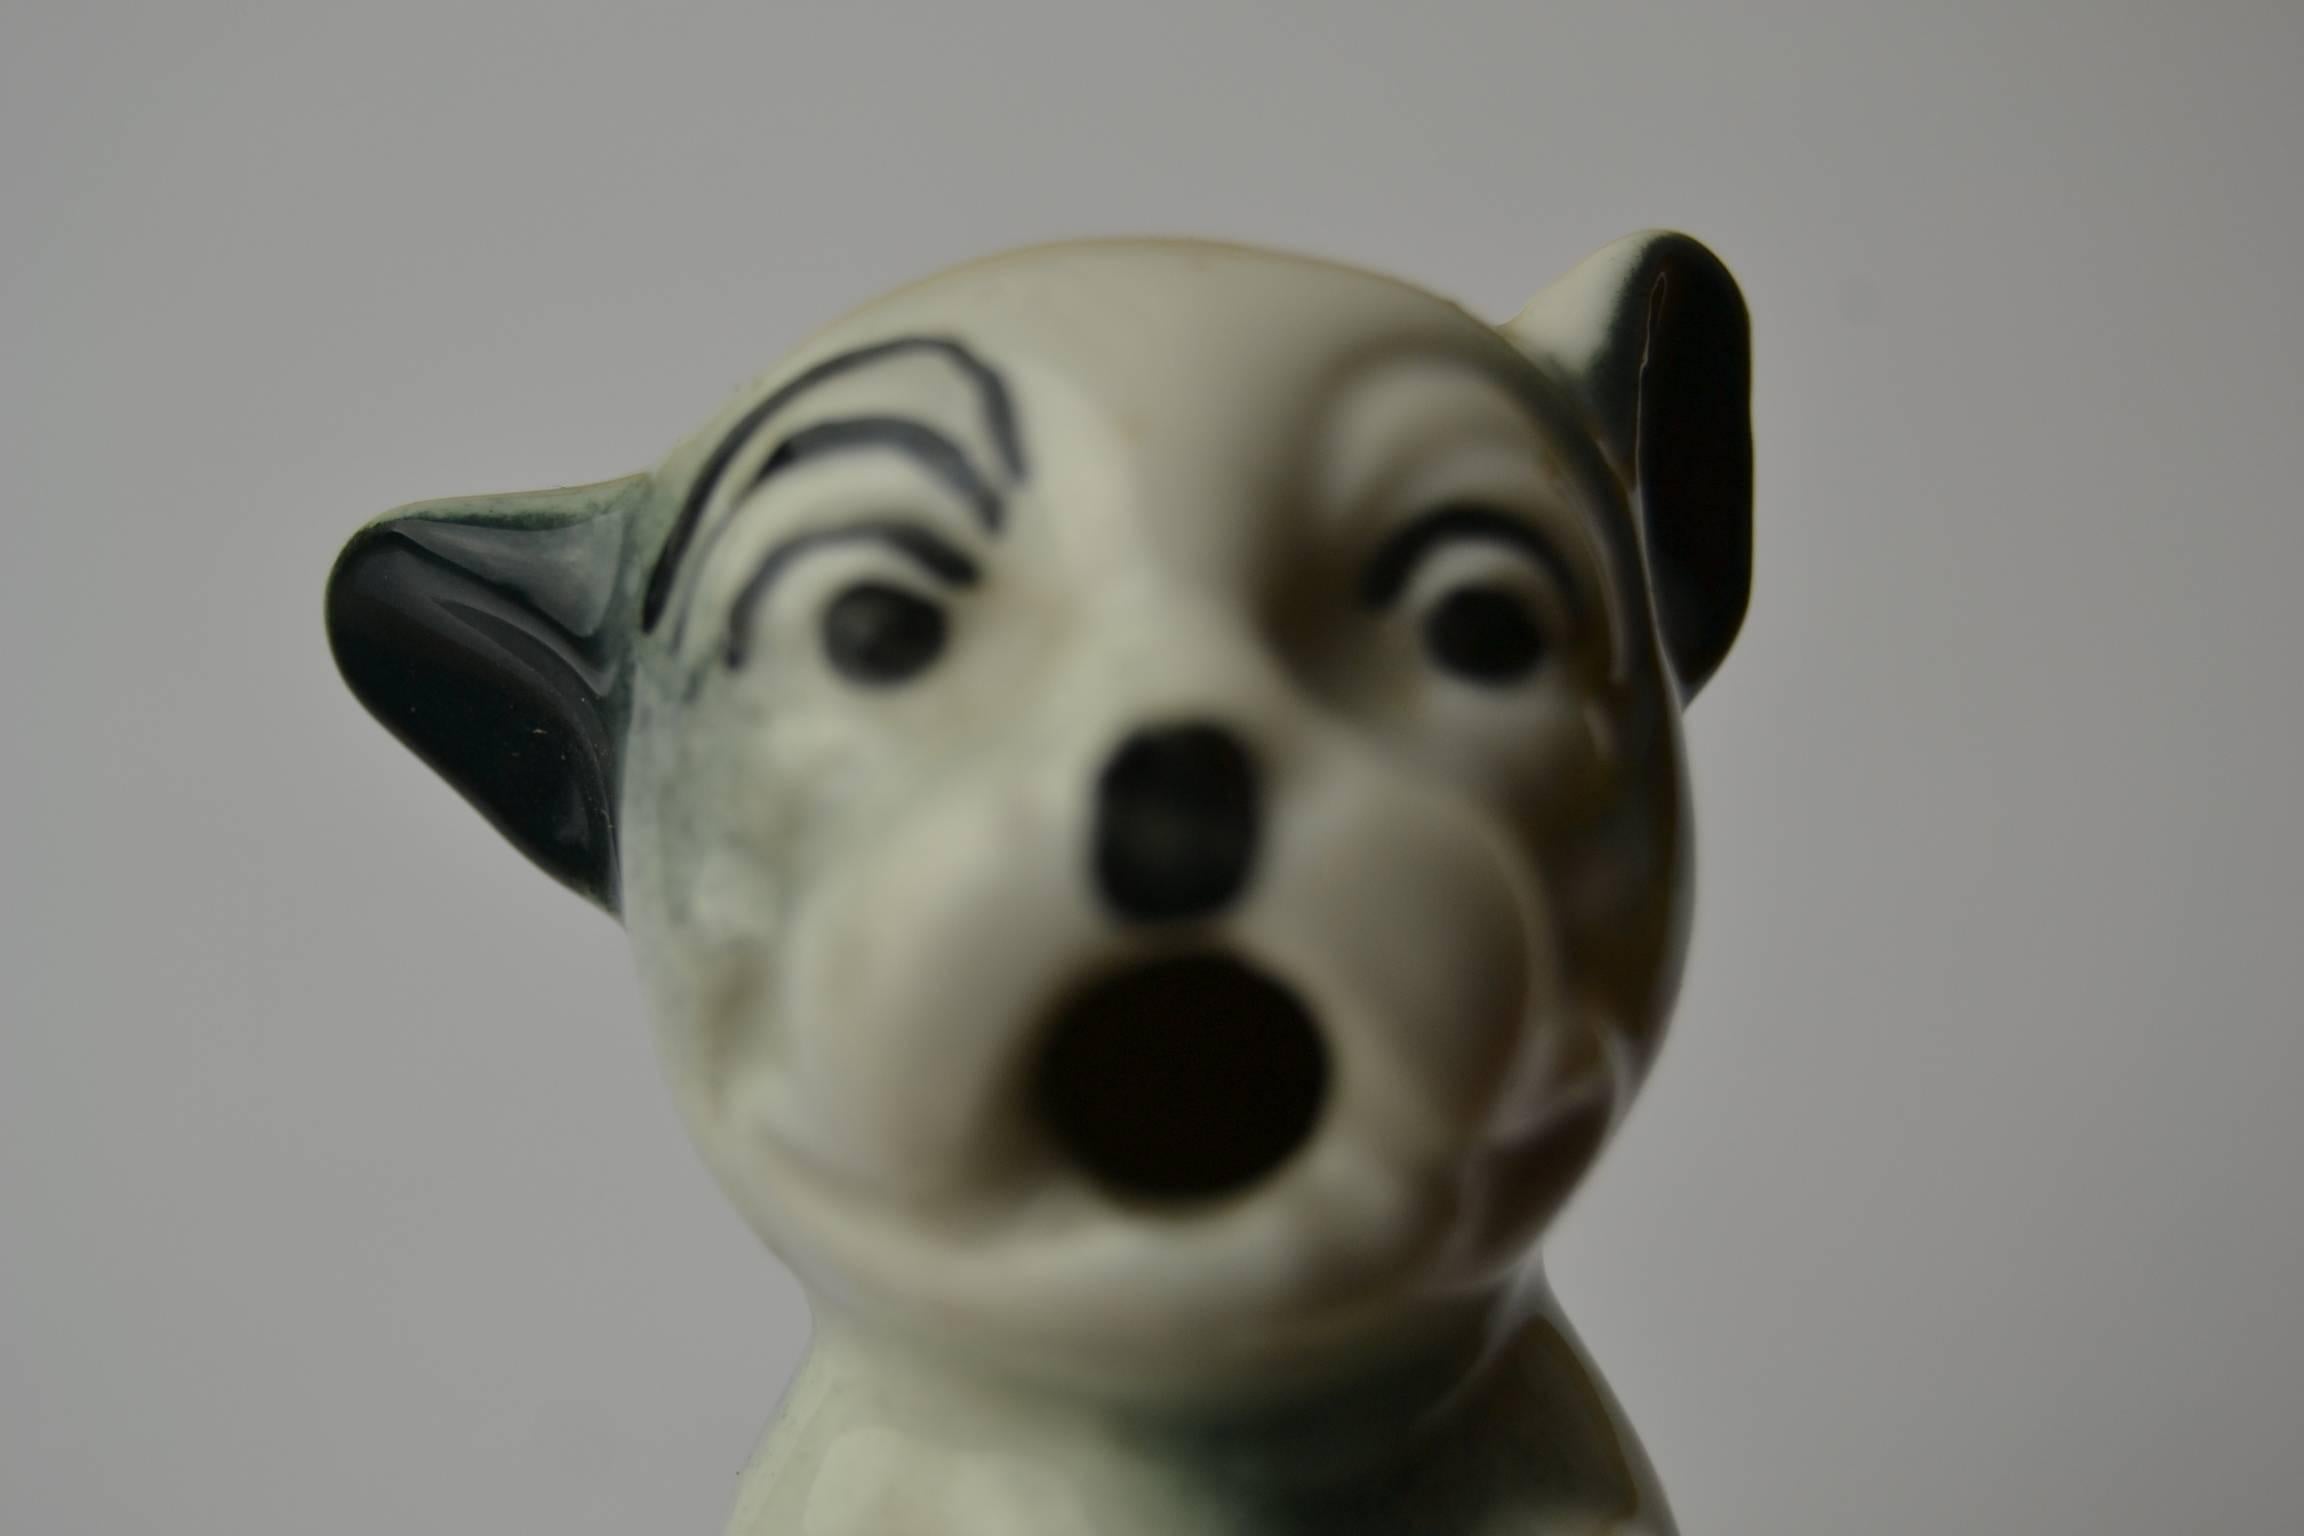 Vintage figural bottle cork - bottle stopper with a porcelain bonzo the dog on top.
Bonzo is a famous caricature bulldog dog.  


 